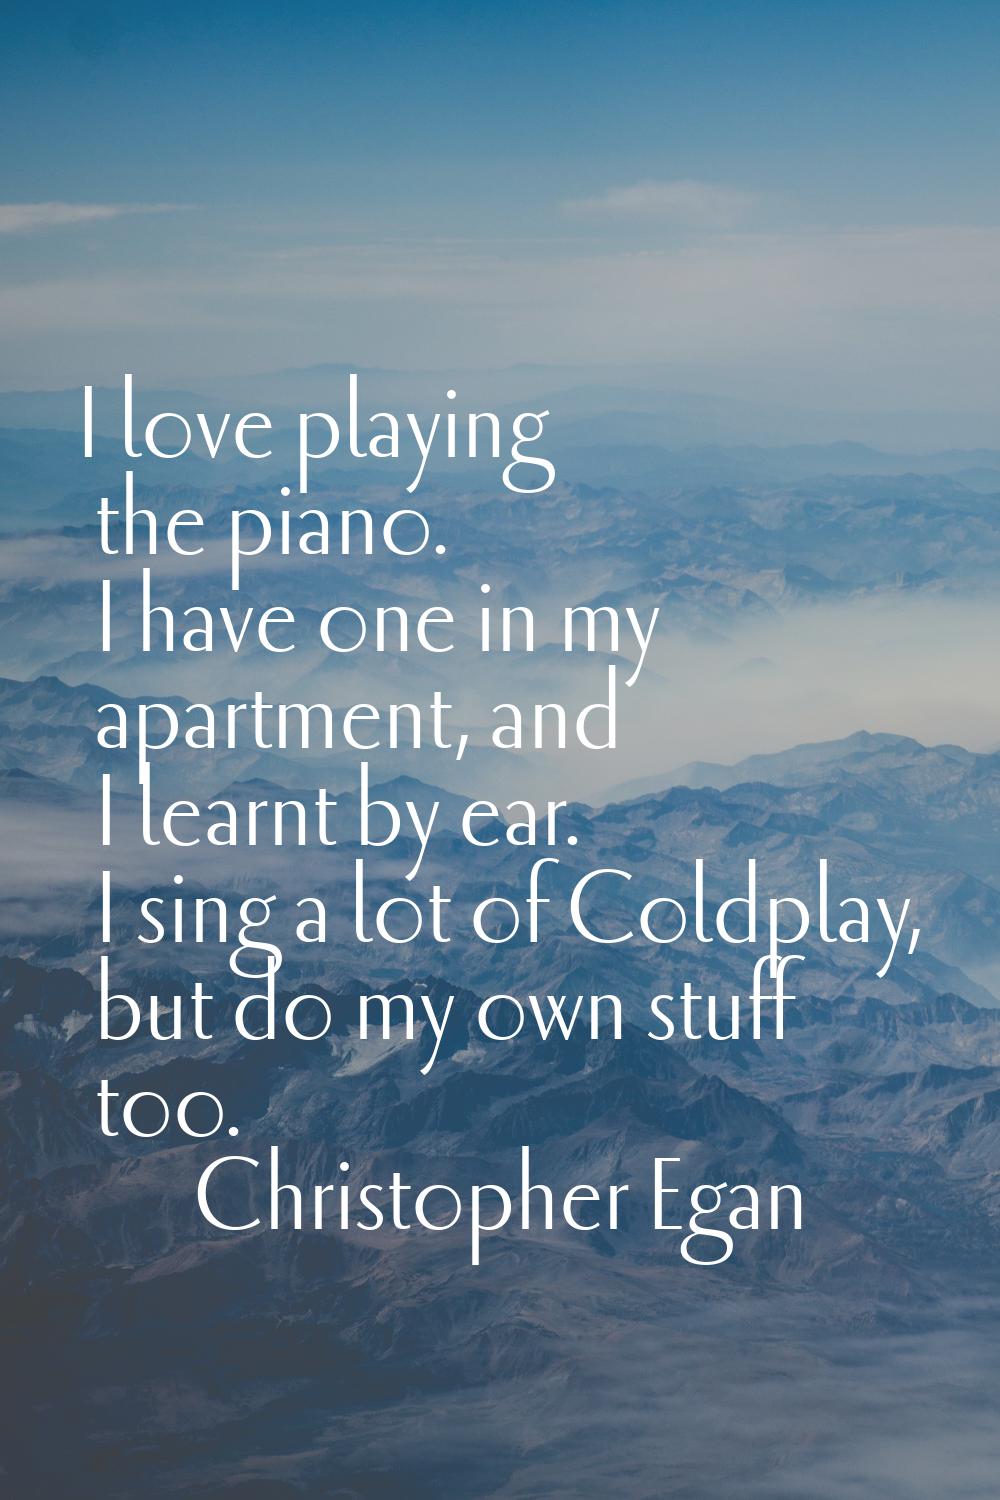 I love playing the piano. I have one in my apartment, and I learnt by ear. I sing a lot of Coldplay